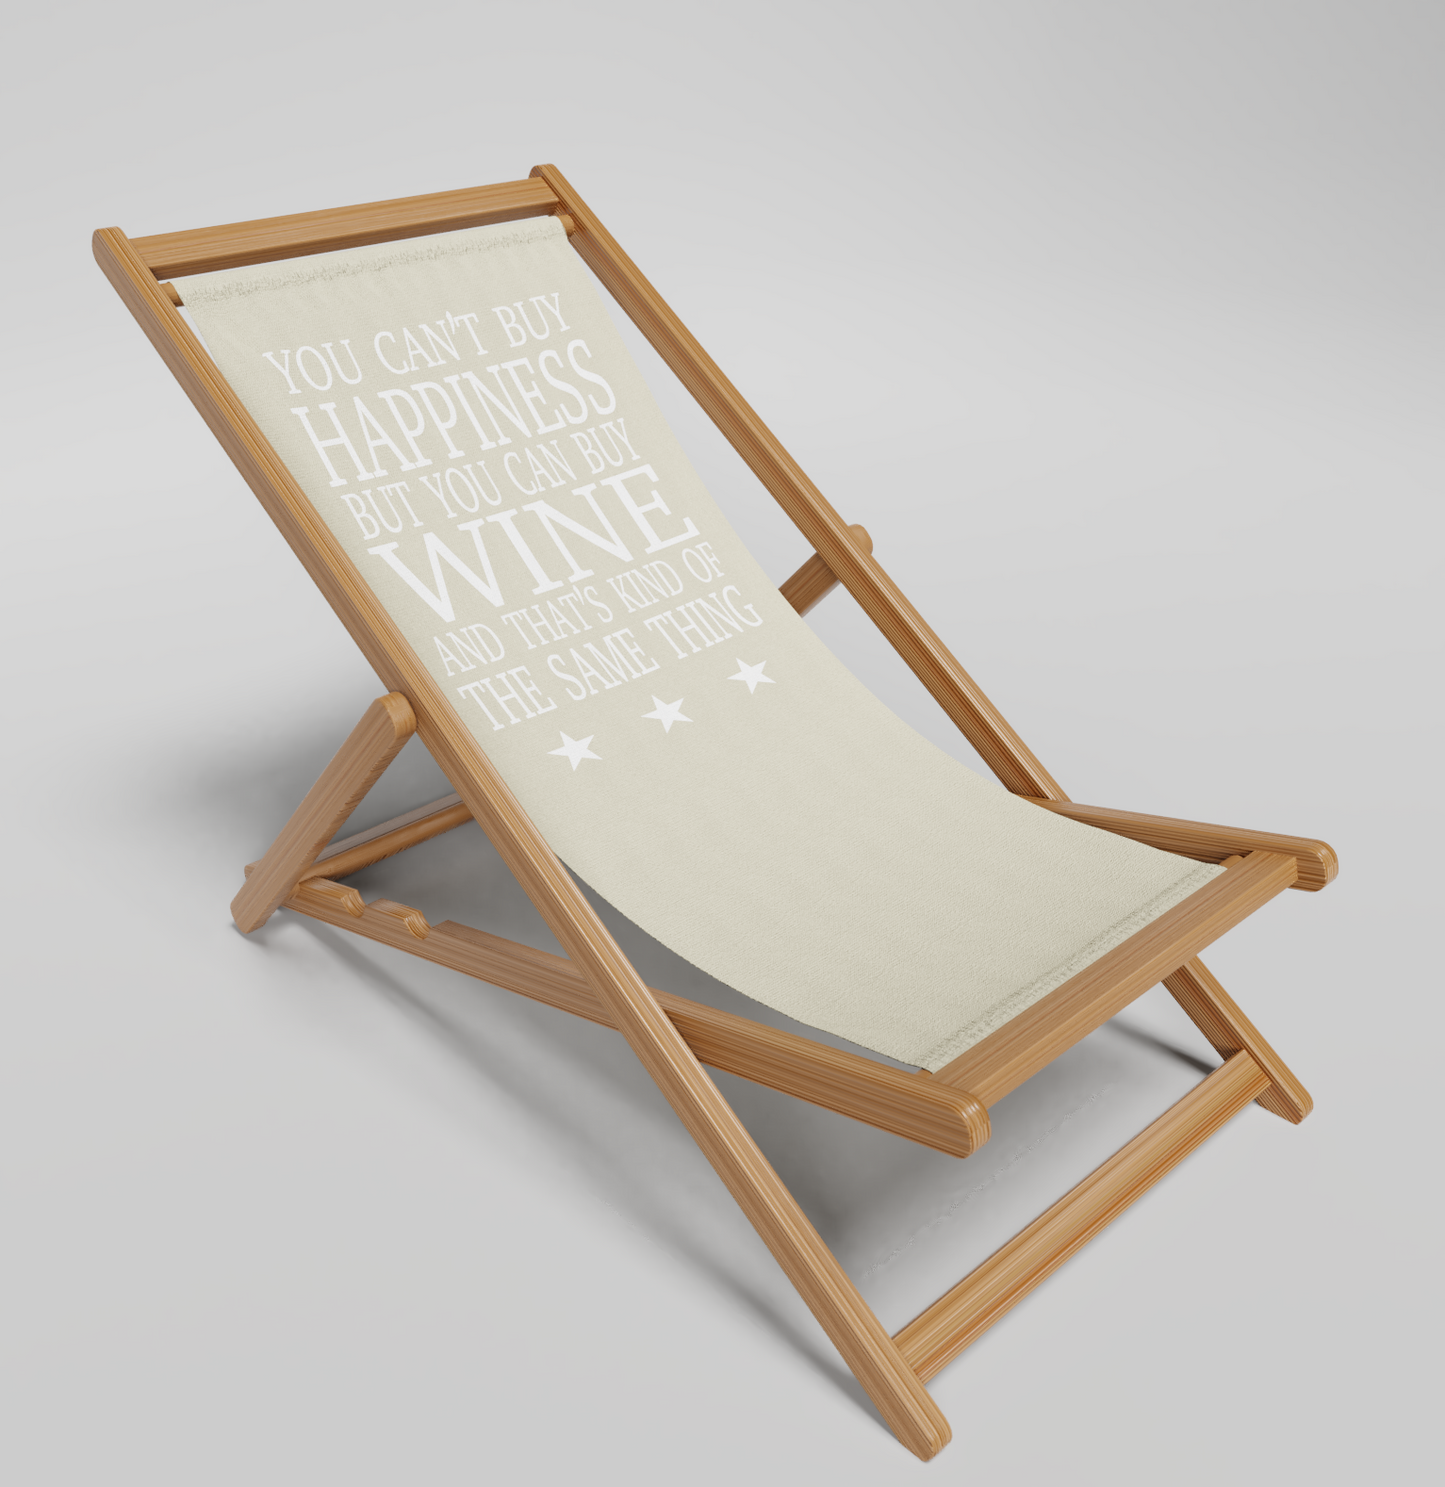 Deck Chairs - Slogans & Signs